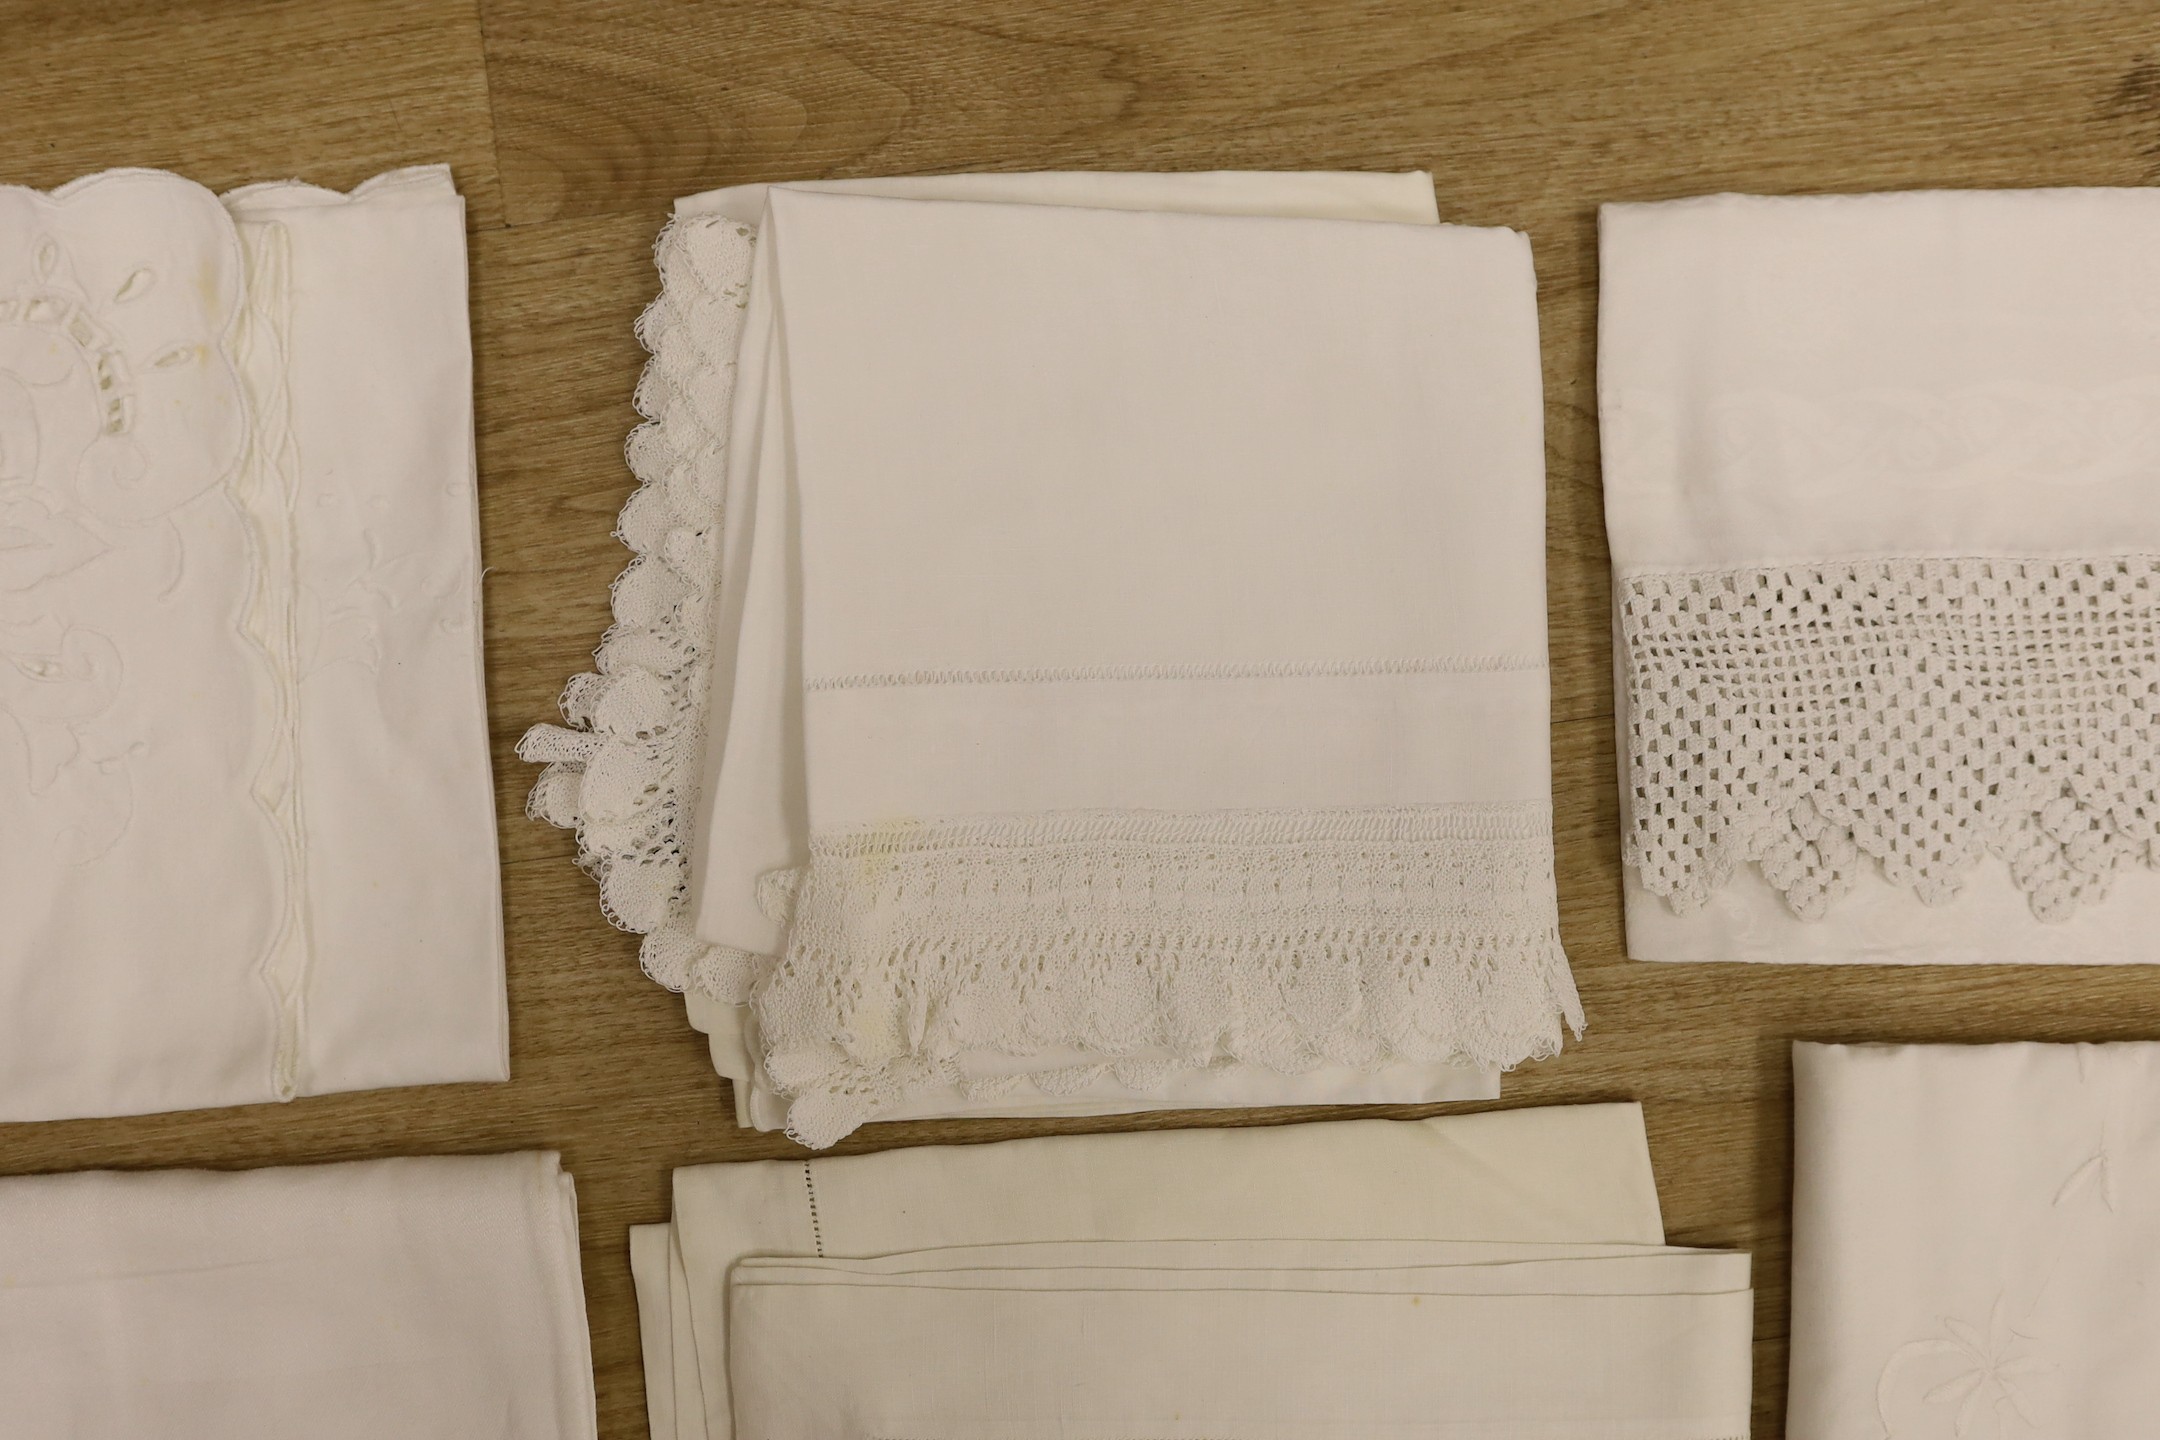 A quantity of lace trimmed and embroidered fabrics including tray cloths and pillow cases